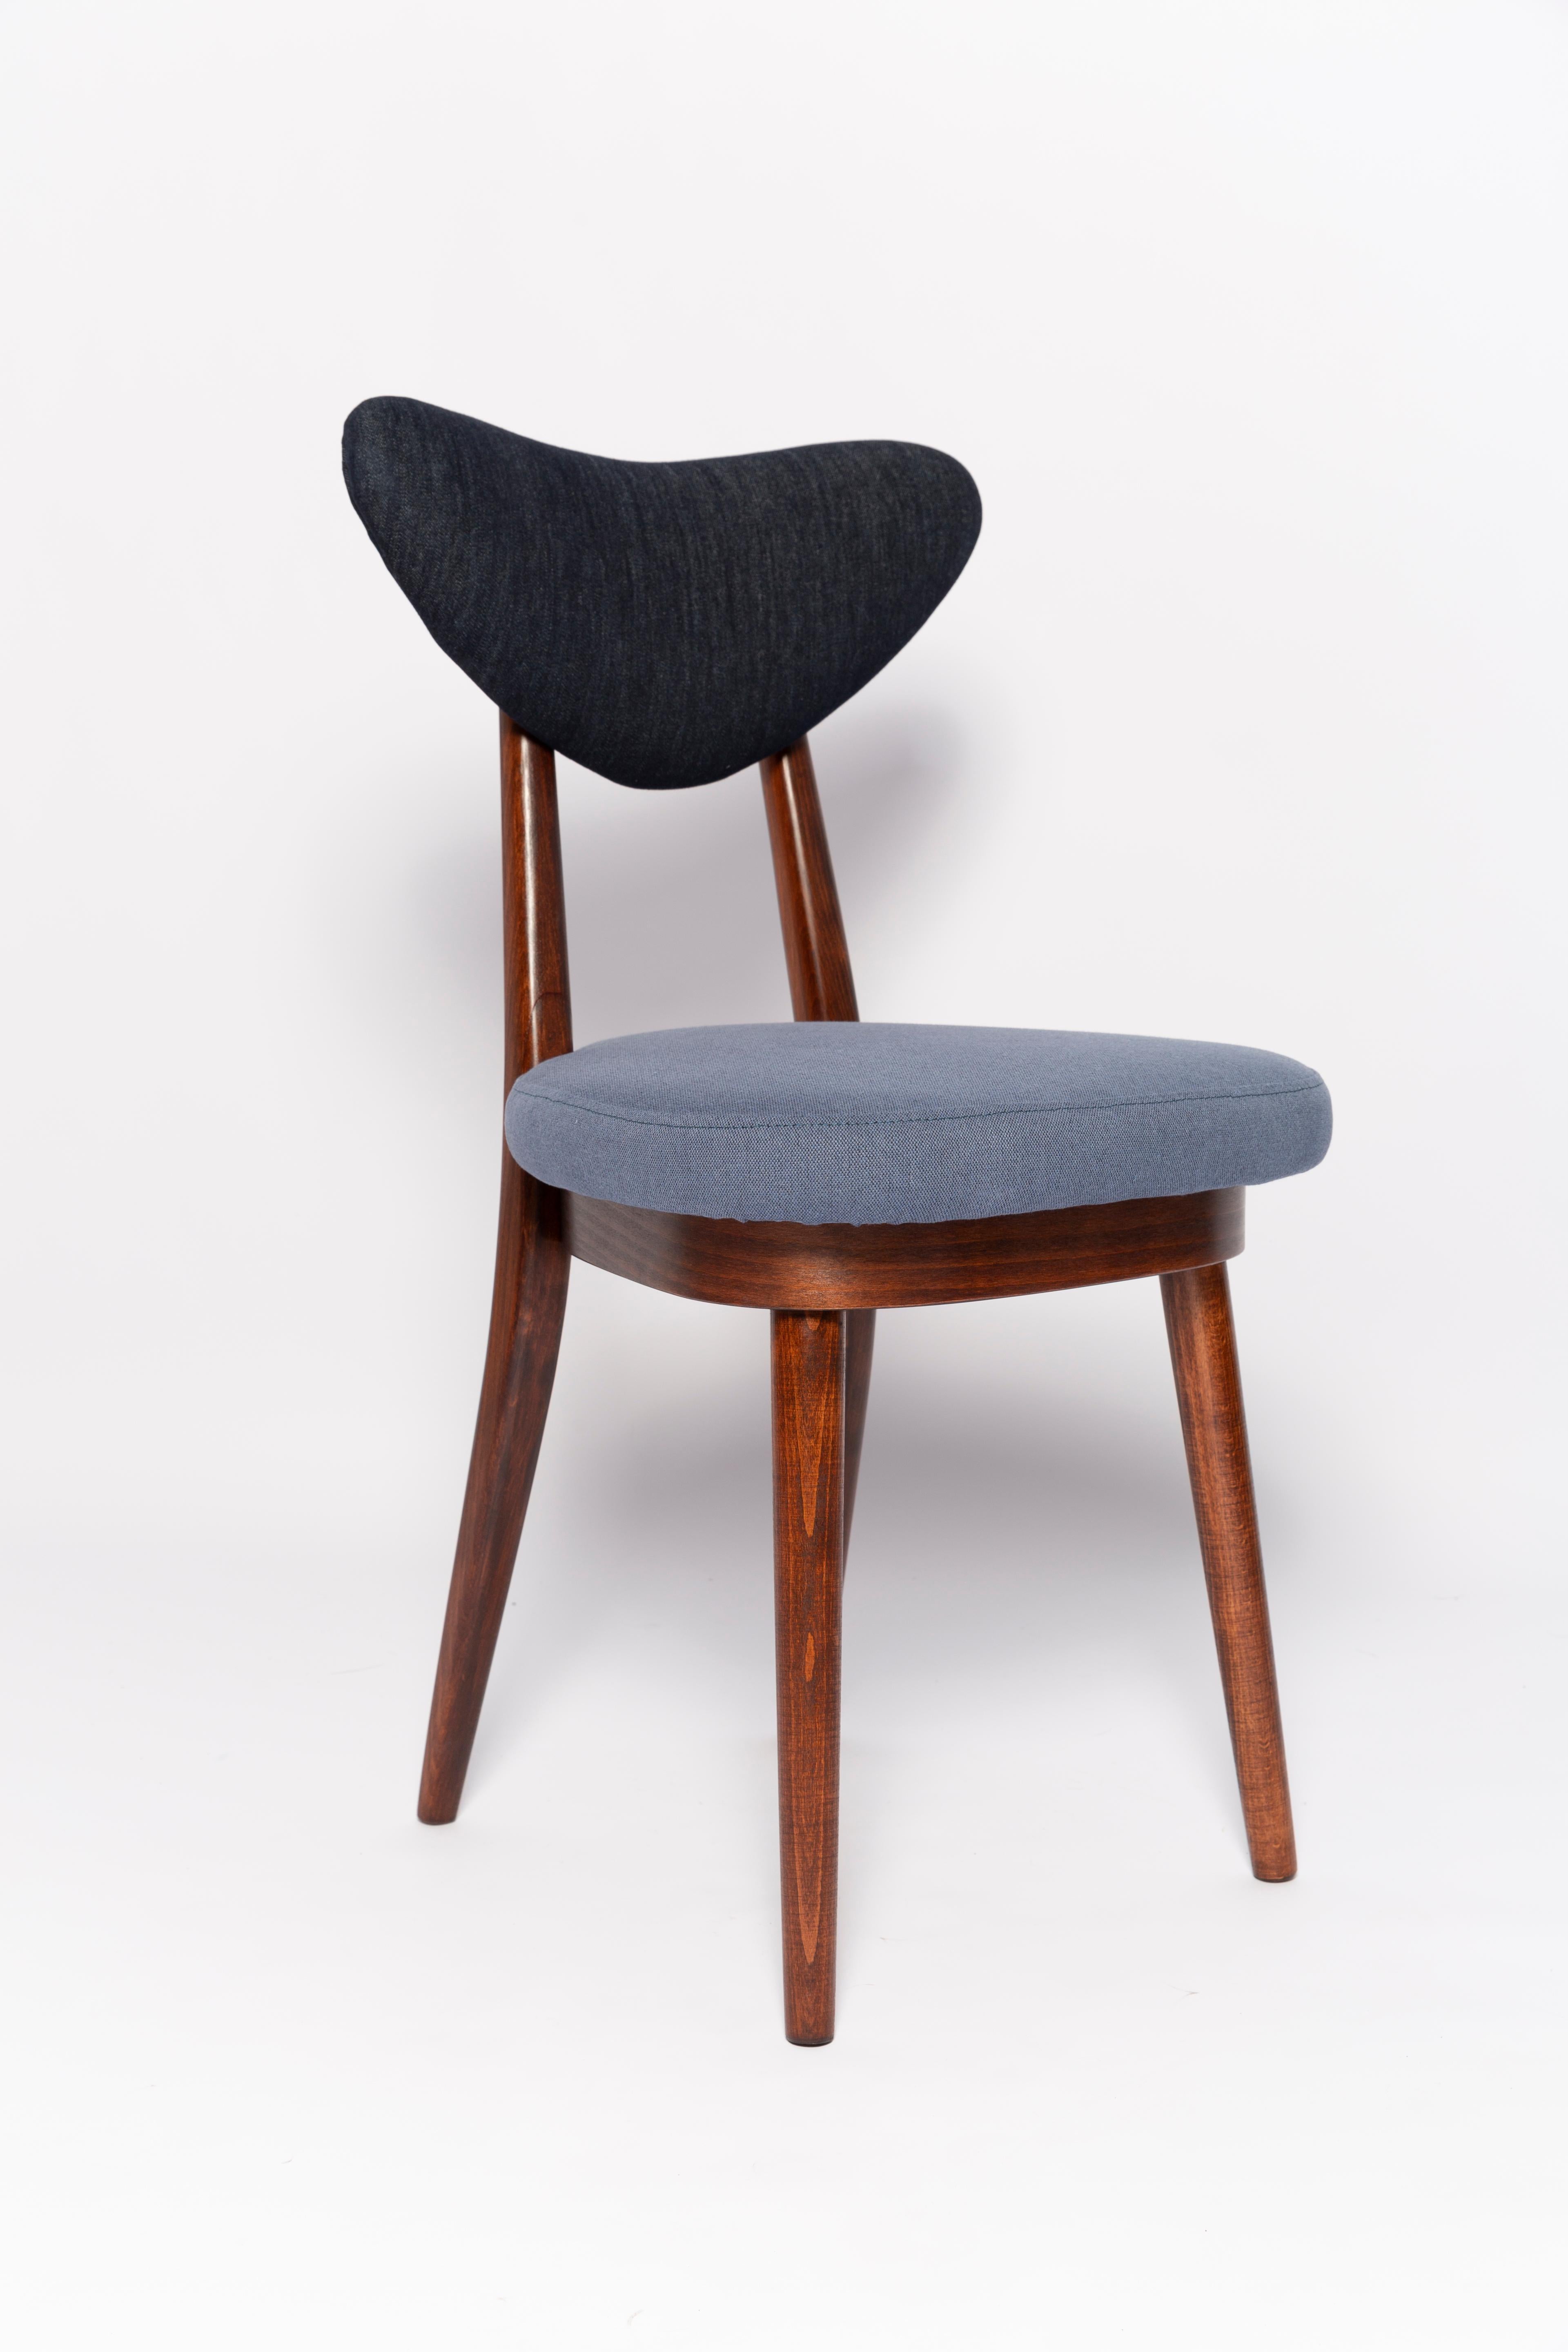 Hand-Crafted Midcentury Medium and Dark Blue Denim Heart Chair, Europe, 1960s For Sale